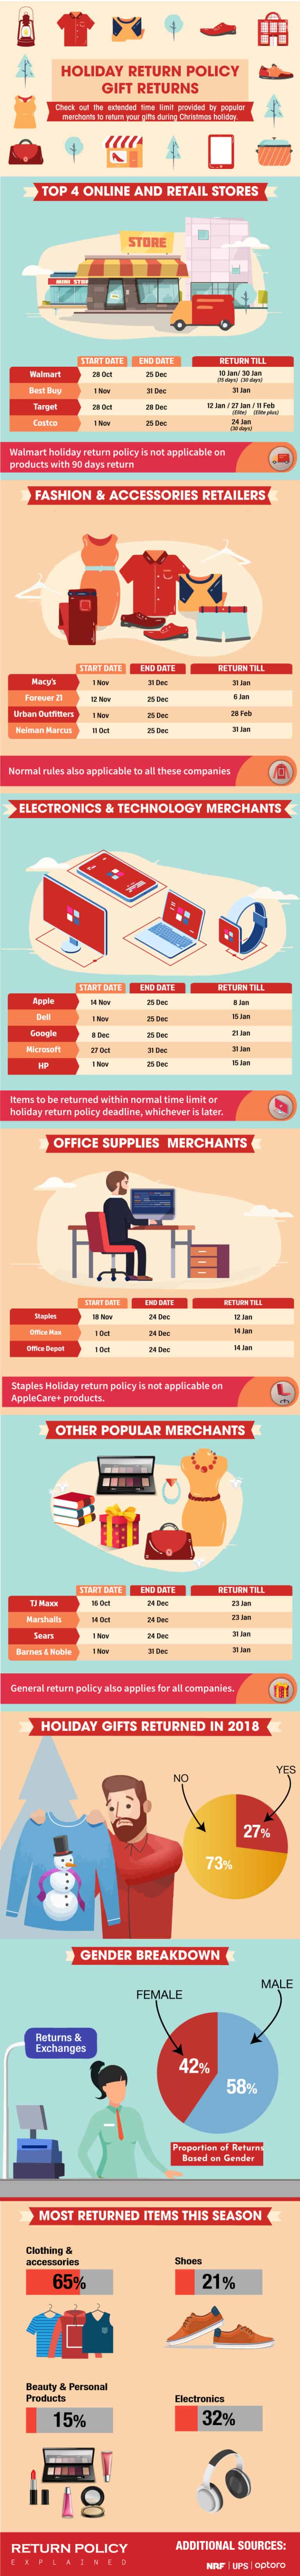 Holiday Return Policy [Infographic]